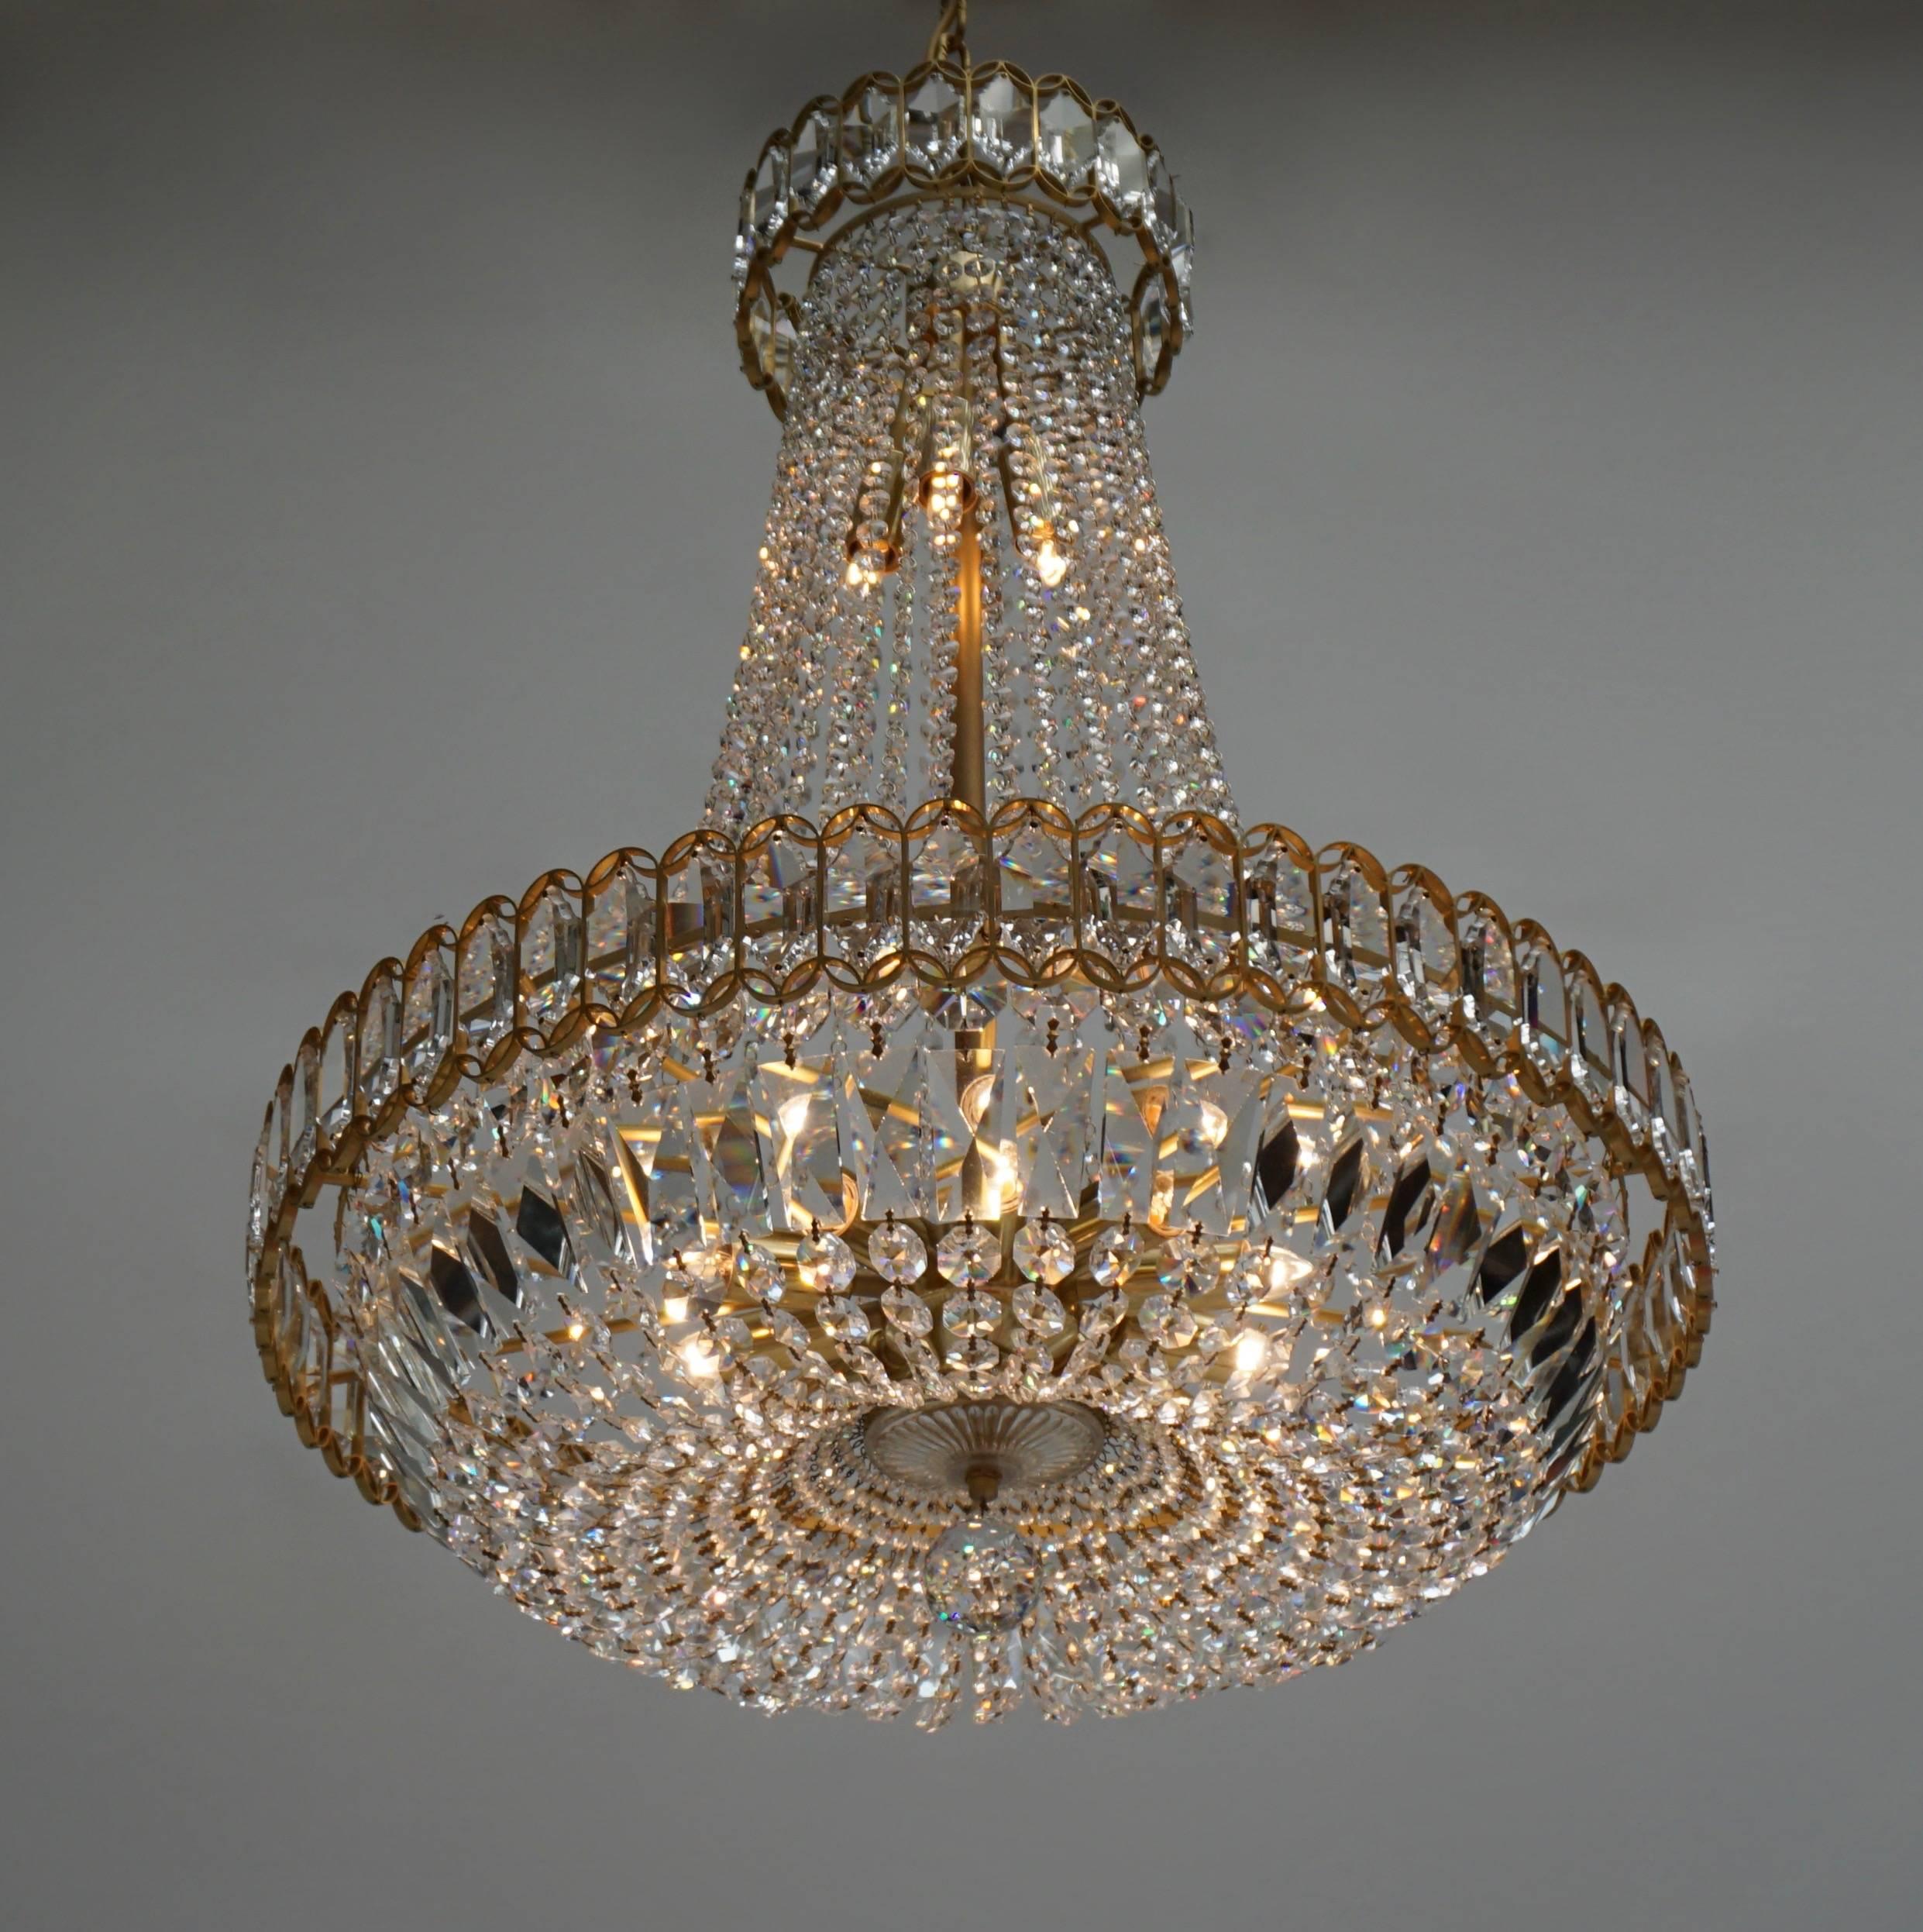 A large and impressive chandelier or pendant light by Bakalowits und Soehne, Austria, manufactured in midcentury, circa 1970.
The fixture is handmade and high quality pieces. A brass frame is decorated with diamond and rose shaped crystal glass.